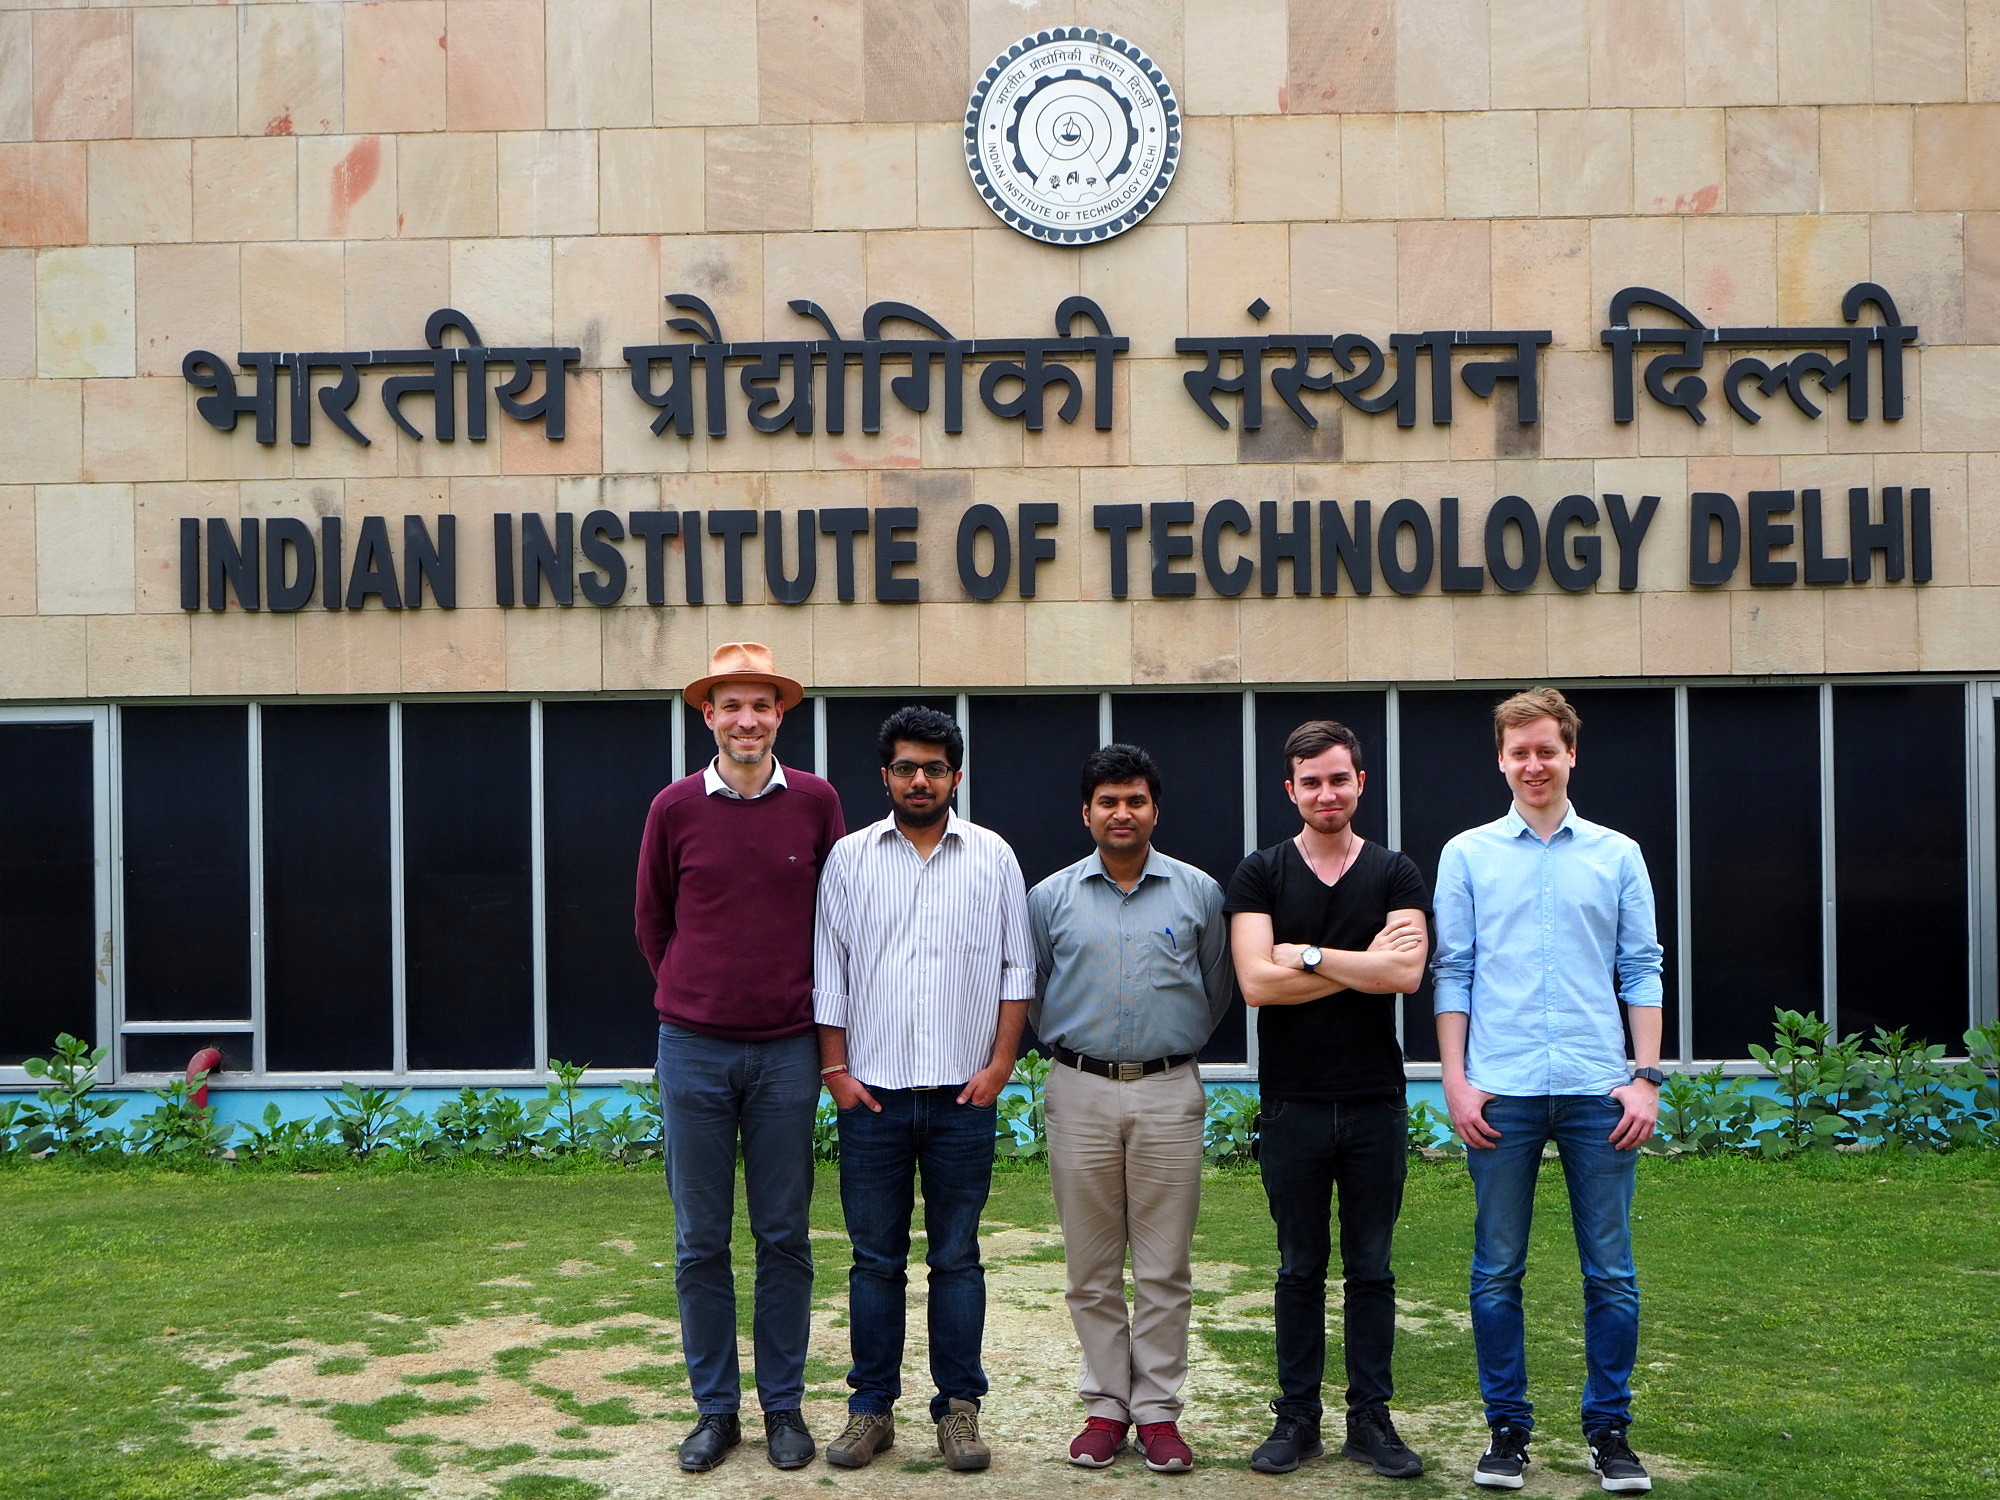 Group photo of five researchers from both universities at the Indian Institute of Technology Delhi.